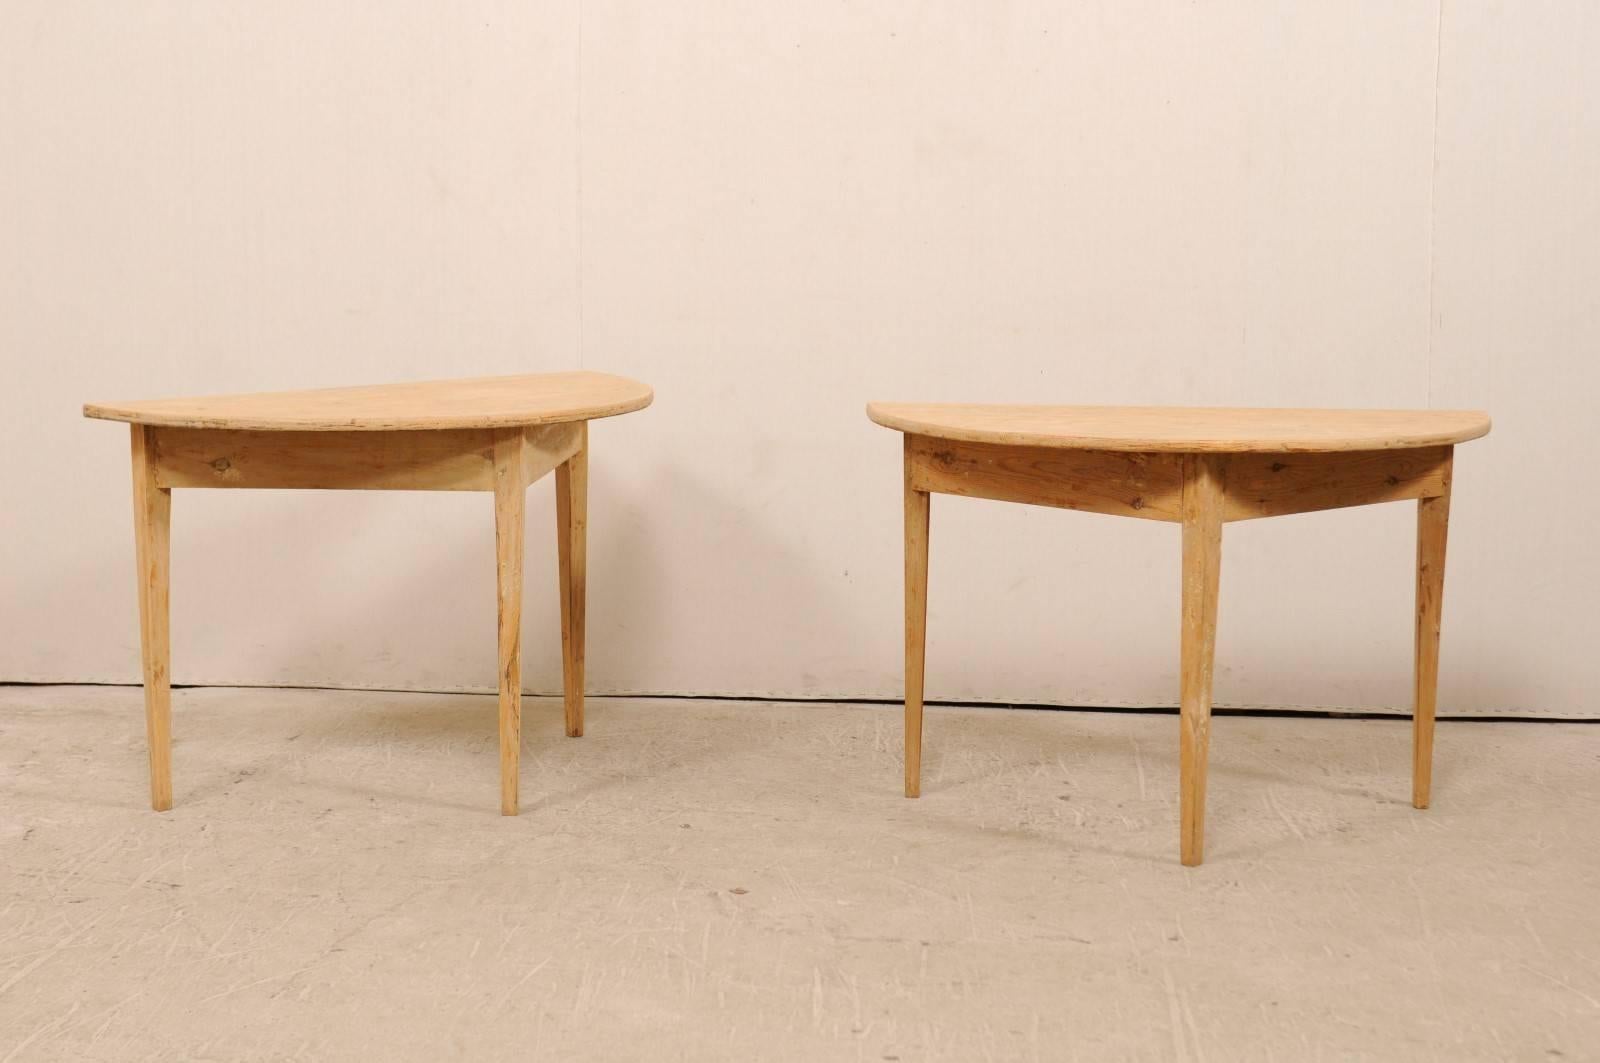 A pair of 19th century Swedish painted wood demilune tables. This pair of Swedish demilune tables from the 1880s features a semi-circular, or half moon top, over a triangular shaped apron. These demilune tables have plain skirts, and are each raised